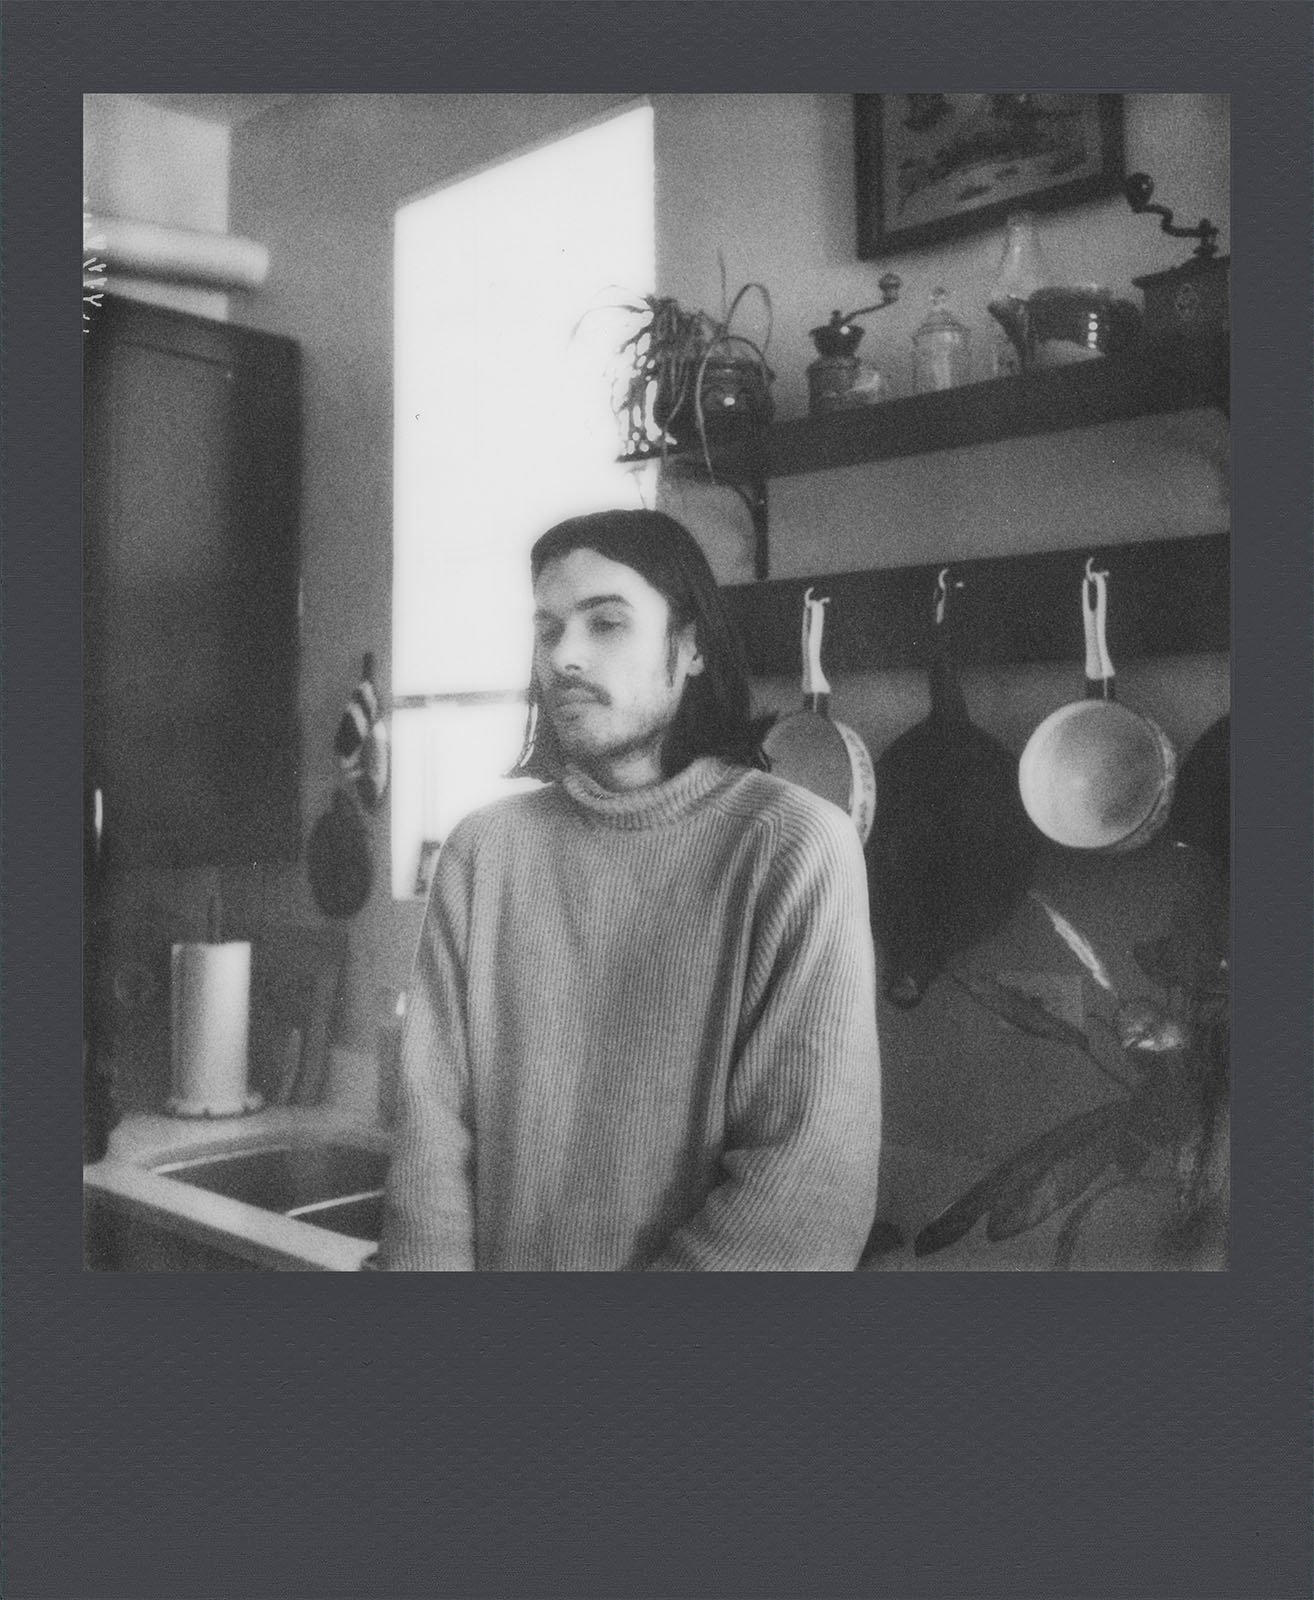 A black and white photo of a person with long hair and a beard, wearing a sweater, standing contemplatively in a cozy kitchen with pots and plants on shelves.